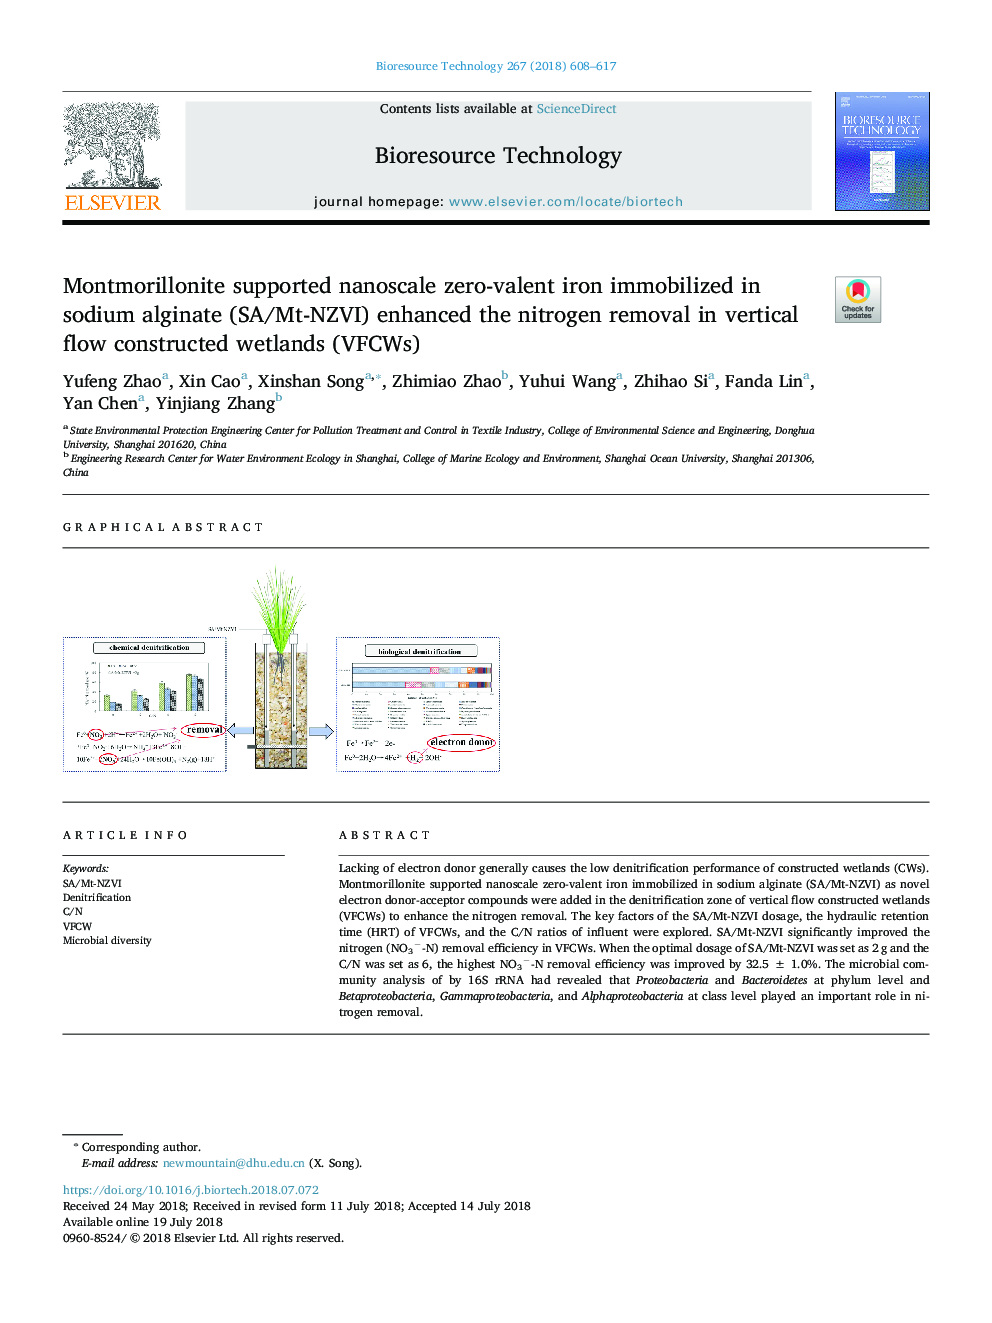 Montmorillonite supported nanoscale zero-valent iron immobilized in sodium alginate (SA/Mt-NZVI) enhanced the nitrogen removal in vertical flow constructed wetlands (VFCWs)